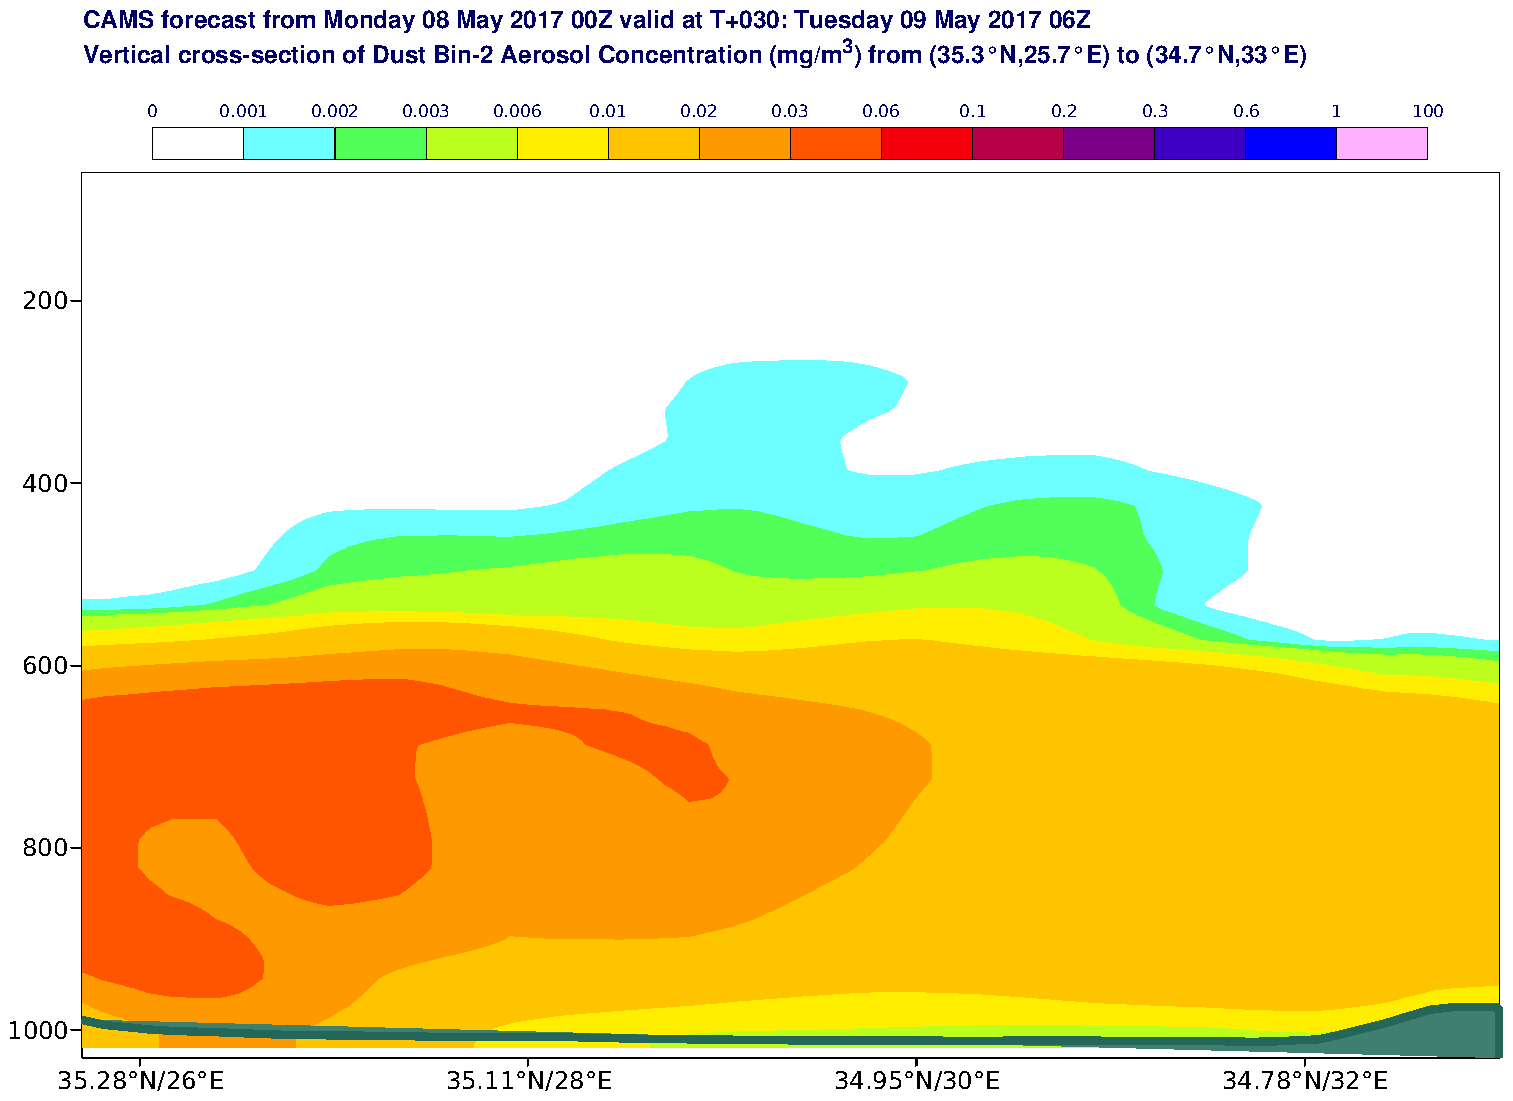 Vertical cross-section of Dust Bin-2 Aerosol Concentration (mg/m3) valid at T30 - 2017-05-09 06:00